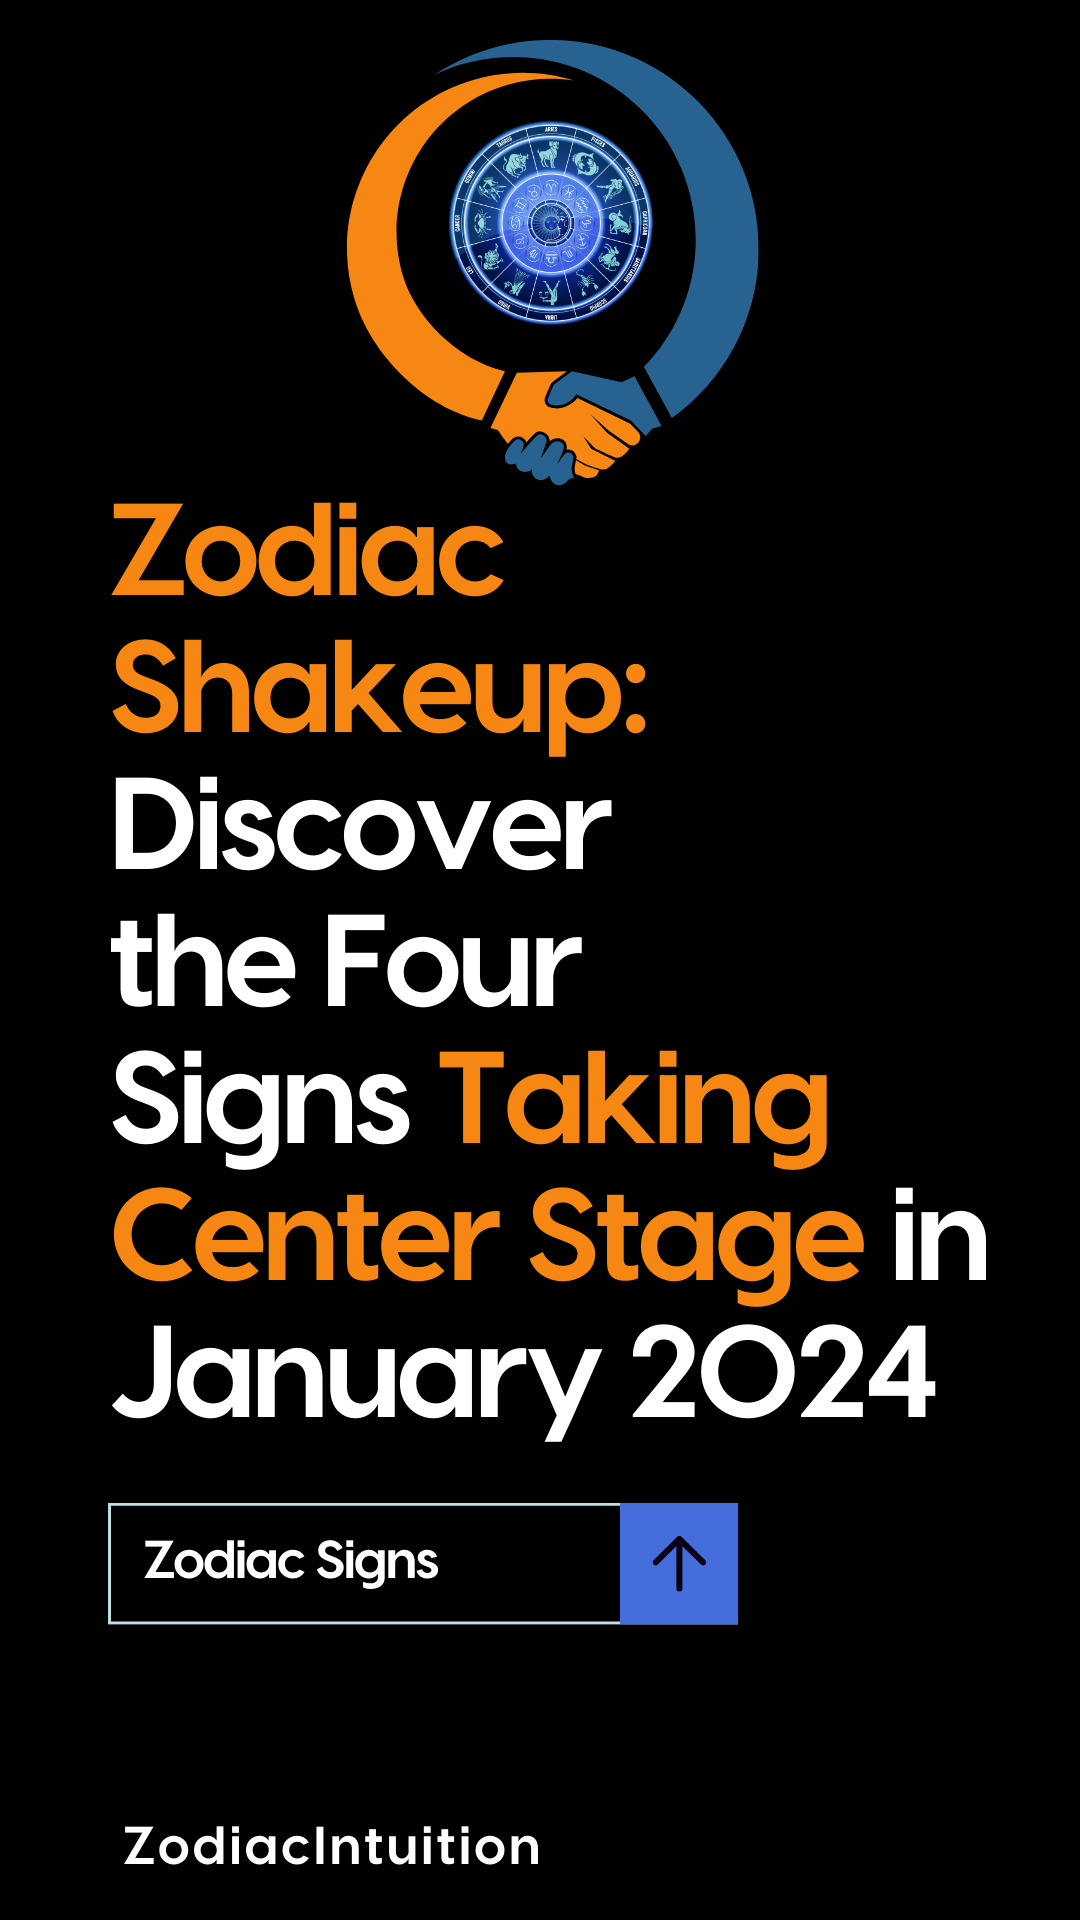 Zodiac Shakeup: Discover the Four Signs Taking Center Stage in January 2024